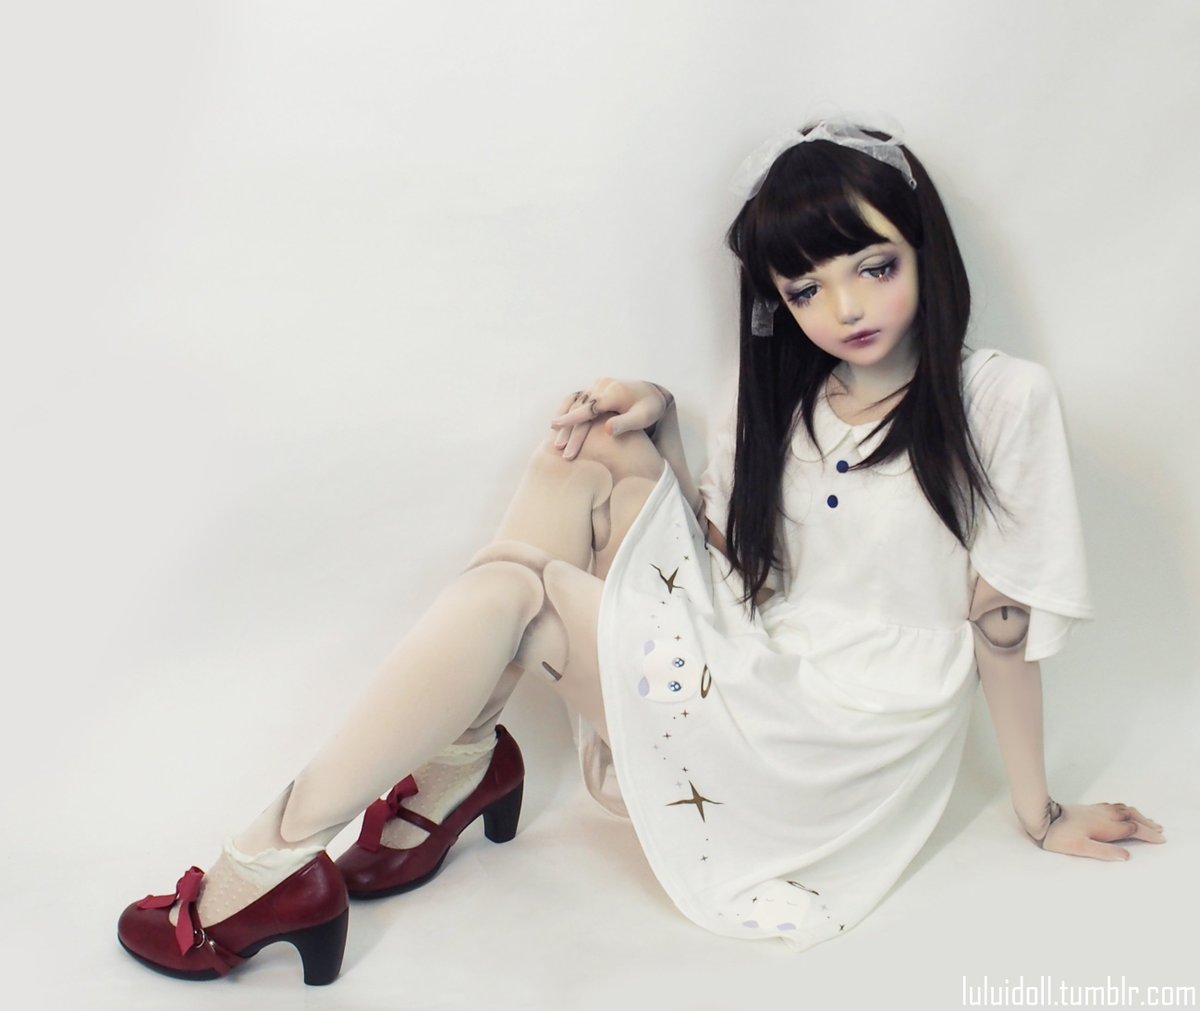 1200px x 1011px - torpedo the ark: All Dolled Up with Lulu Hashimoto